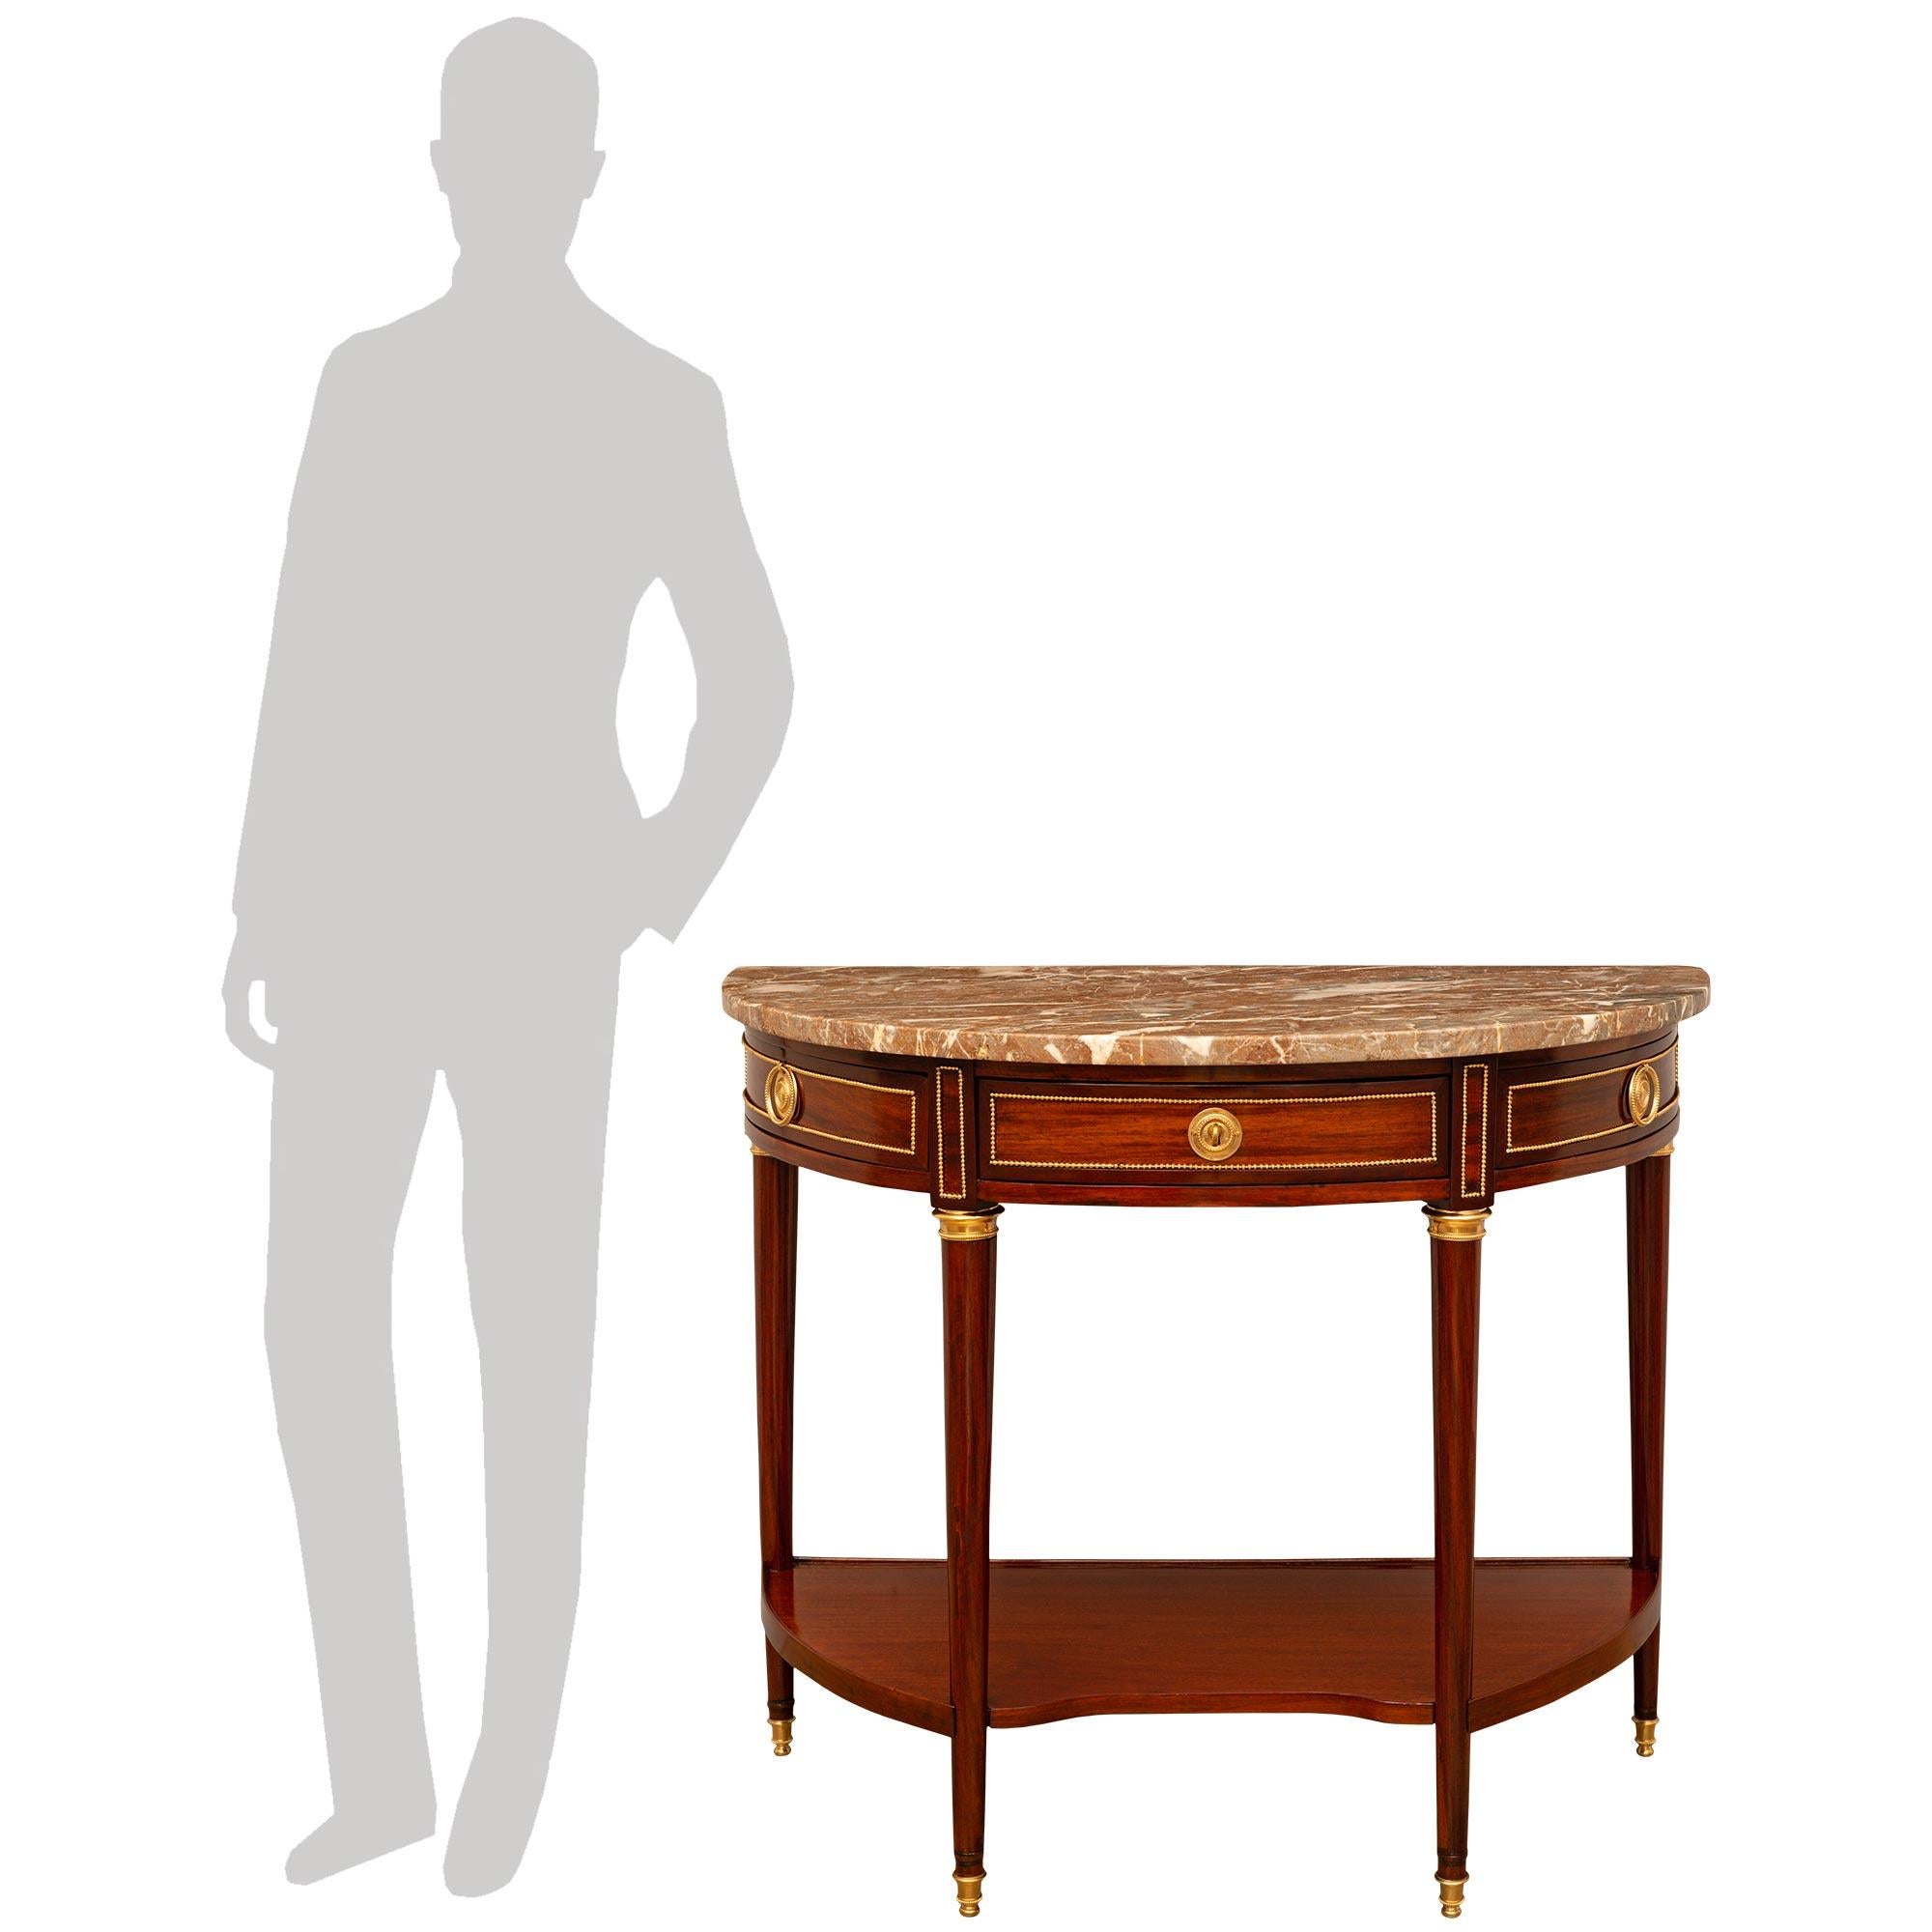 A stunning and high quality French 18th century Louis XVI period Ormolu, Mahogany, and Rouge Royale marble console. This beautiful three drawer console is raised by four circular tapered legs with Ormolu topie shaped feet and mottled Ormolu top